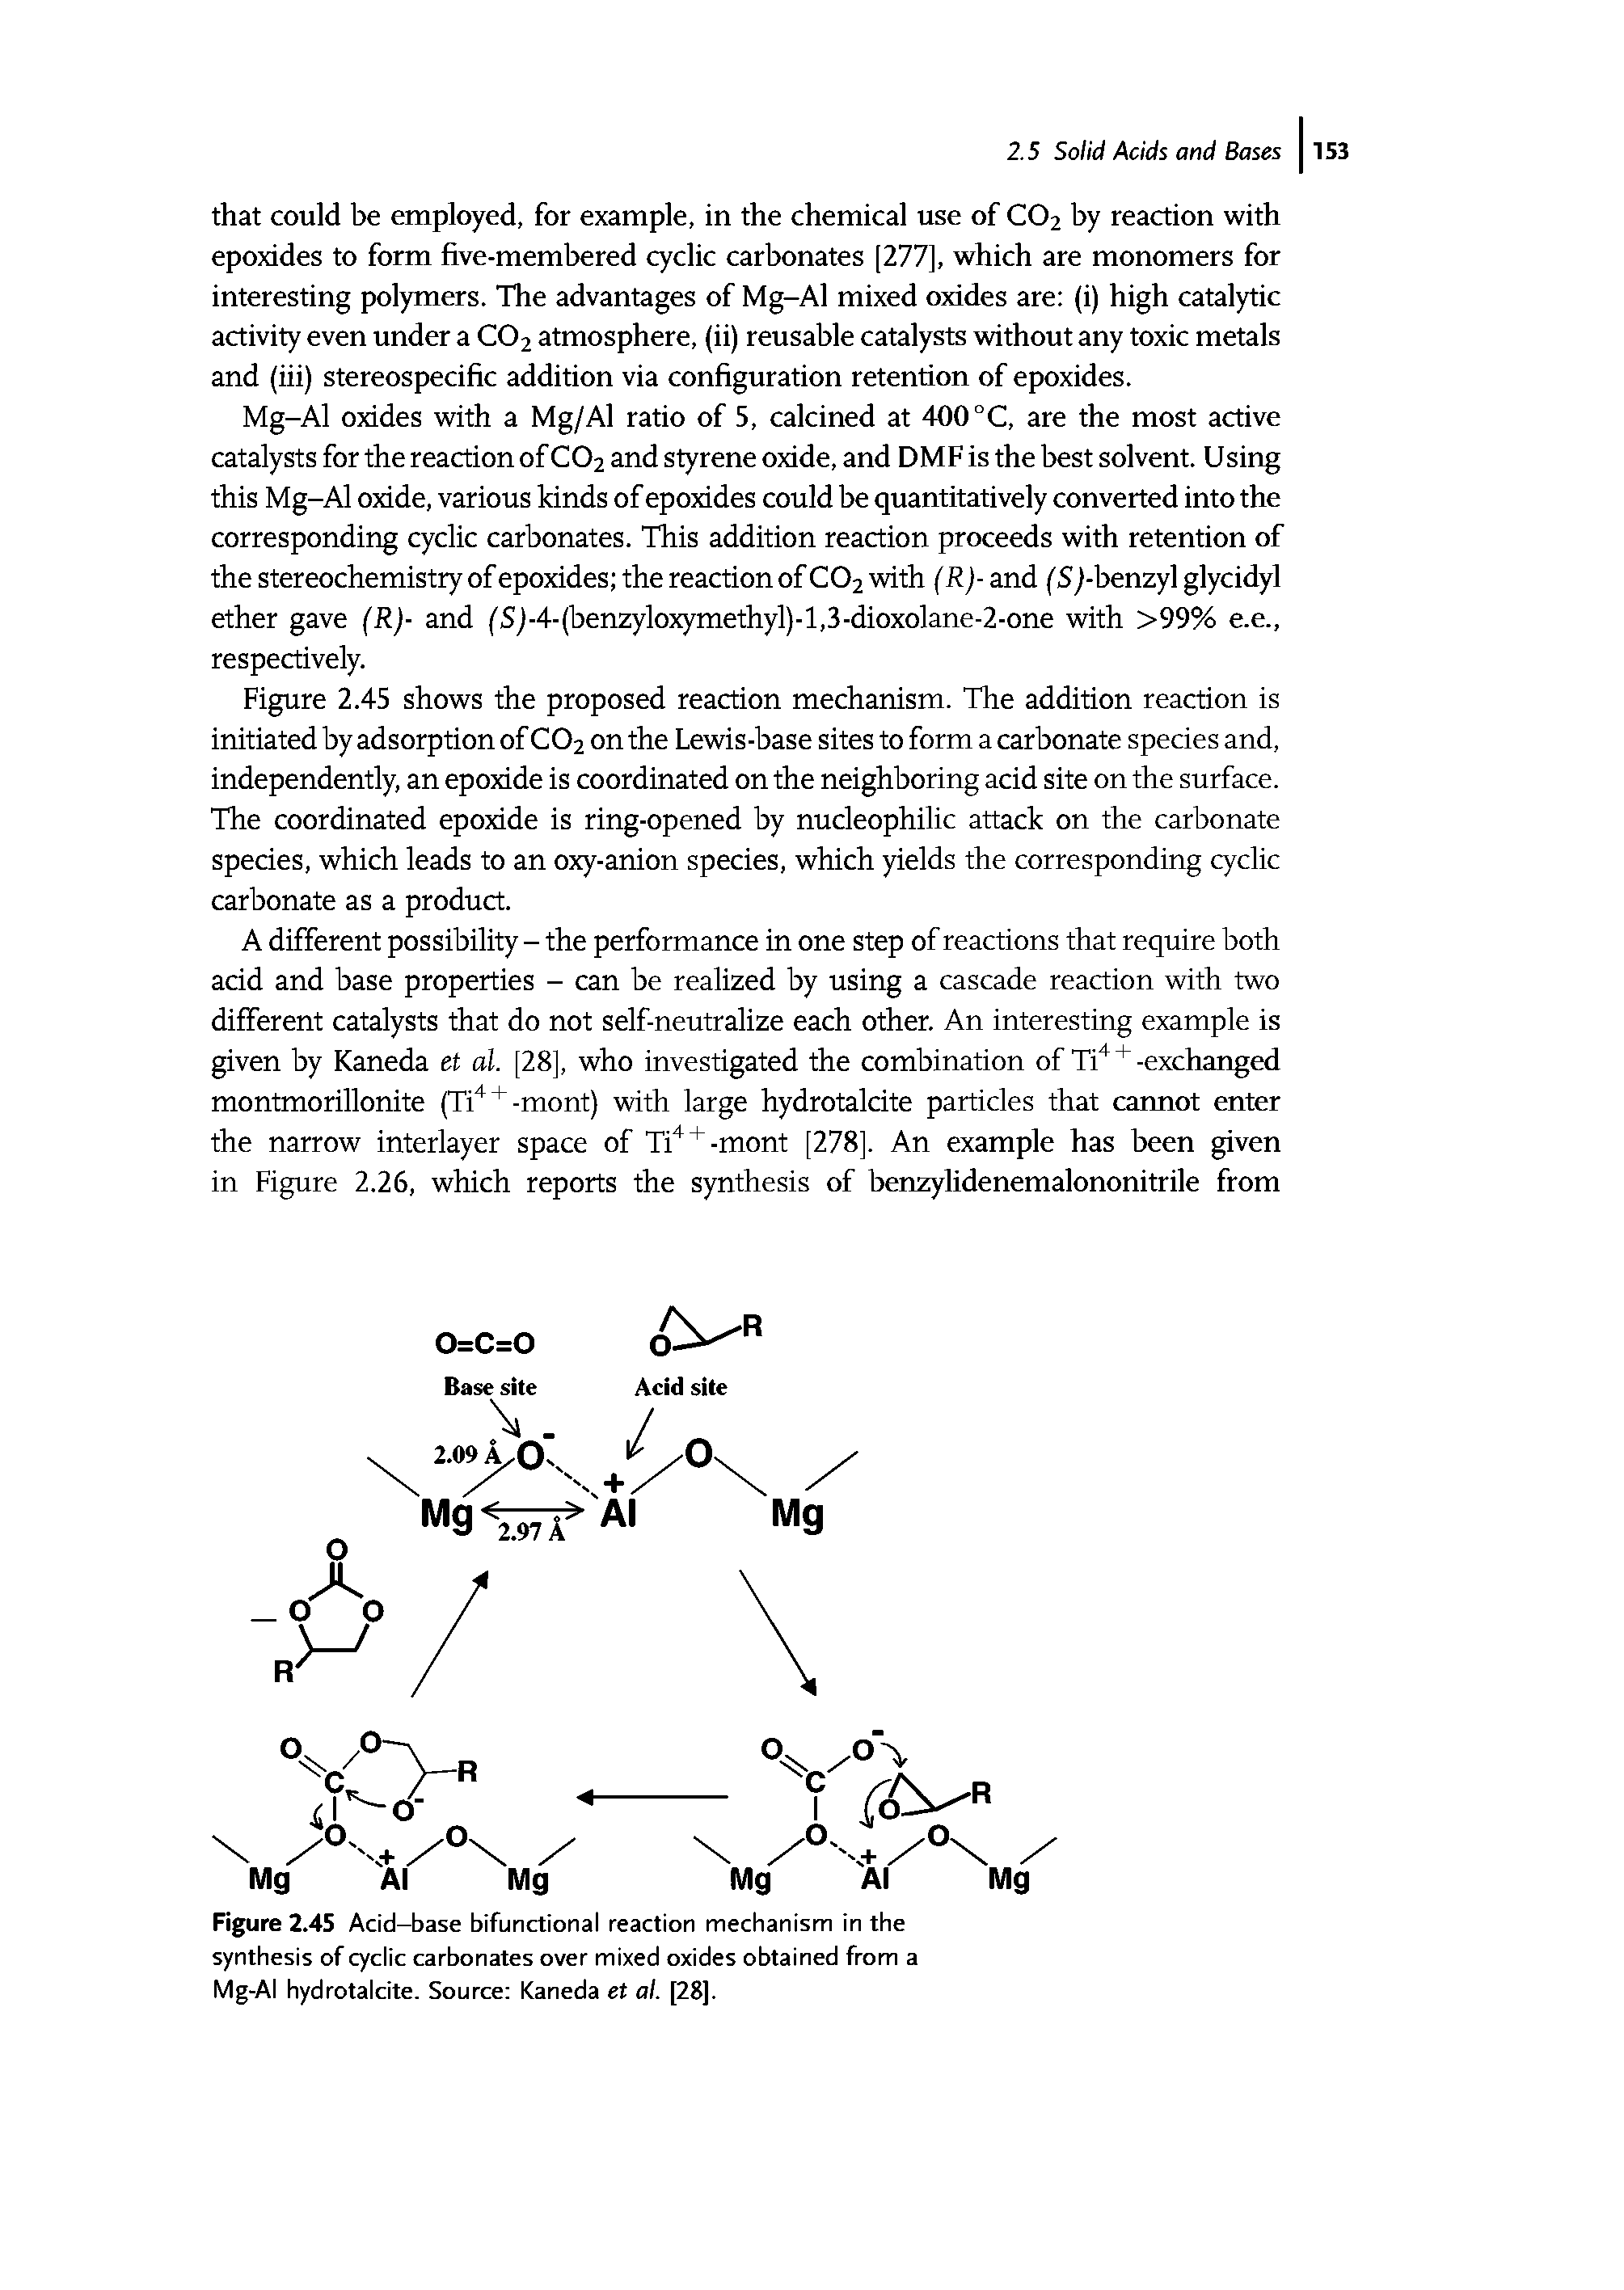 Figure 2.45 Acid-base bifunctional reaction mechanism in the synthesis of cyclic carbonates over mixed oxides obtained from a Mg-Al hydrotalcite. Source Kaneda et al. [28].